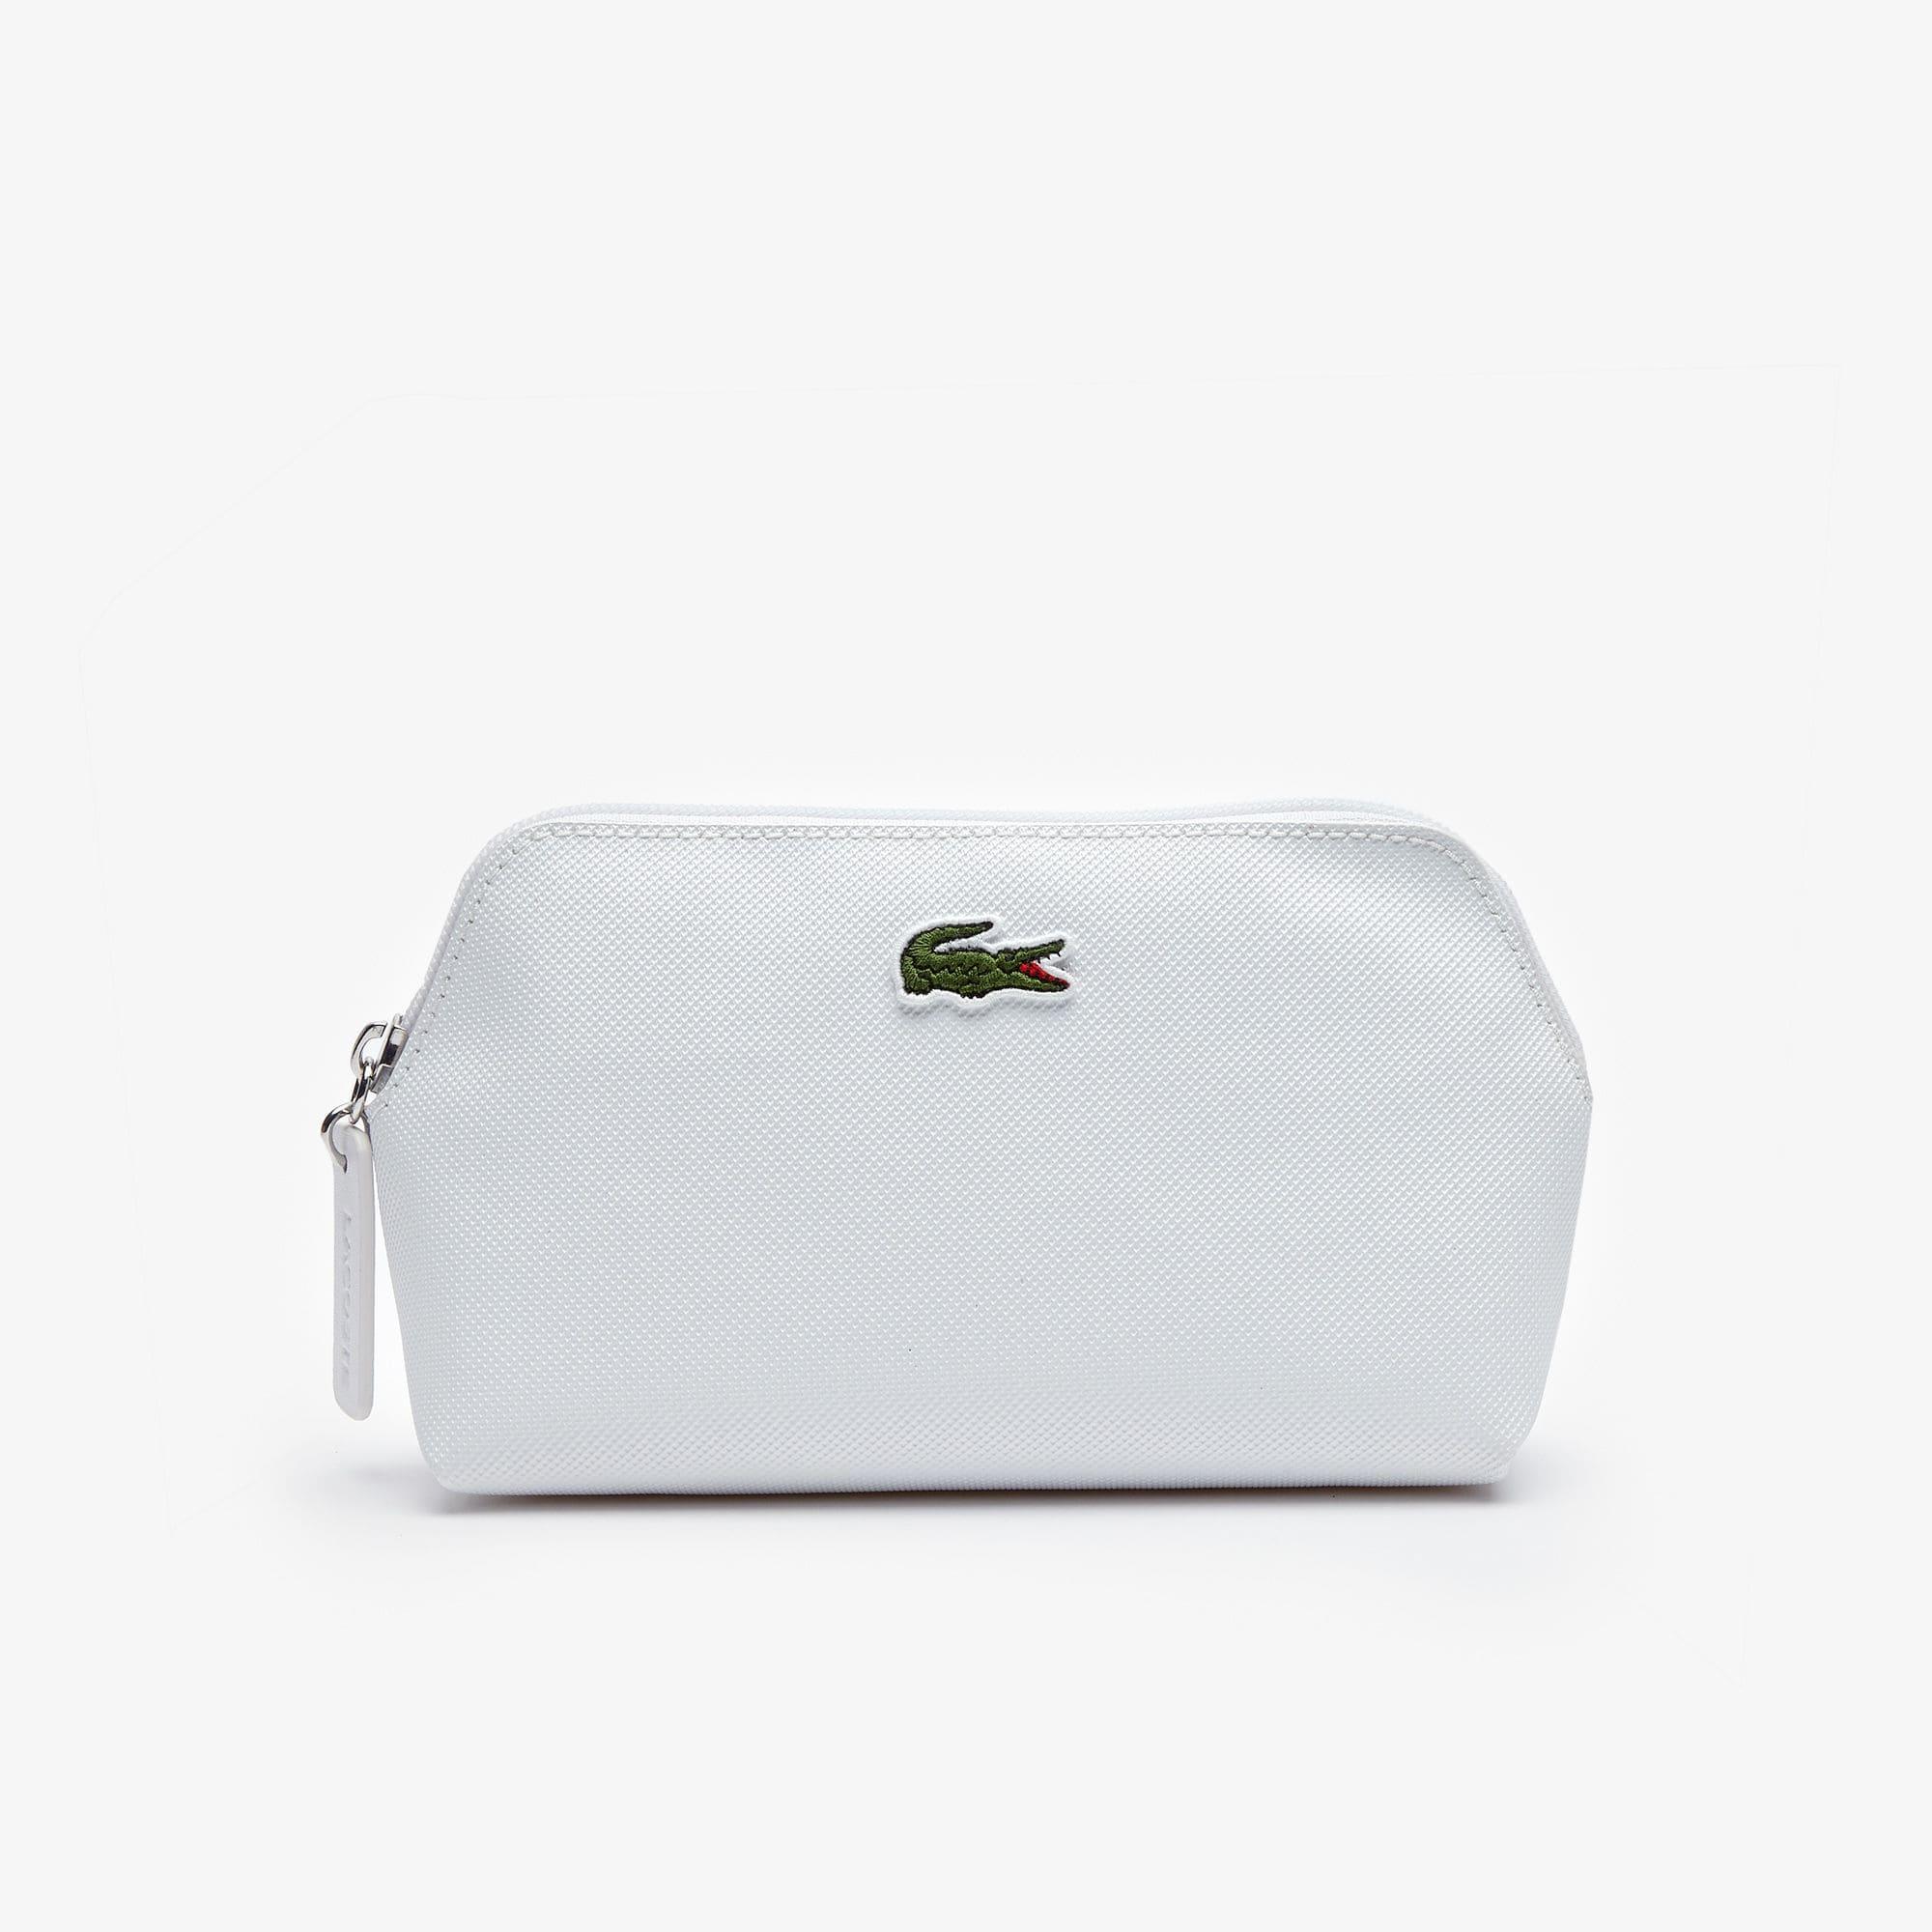 Lacoste L.12.12 Makeup Bag in Bright 